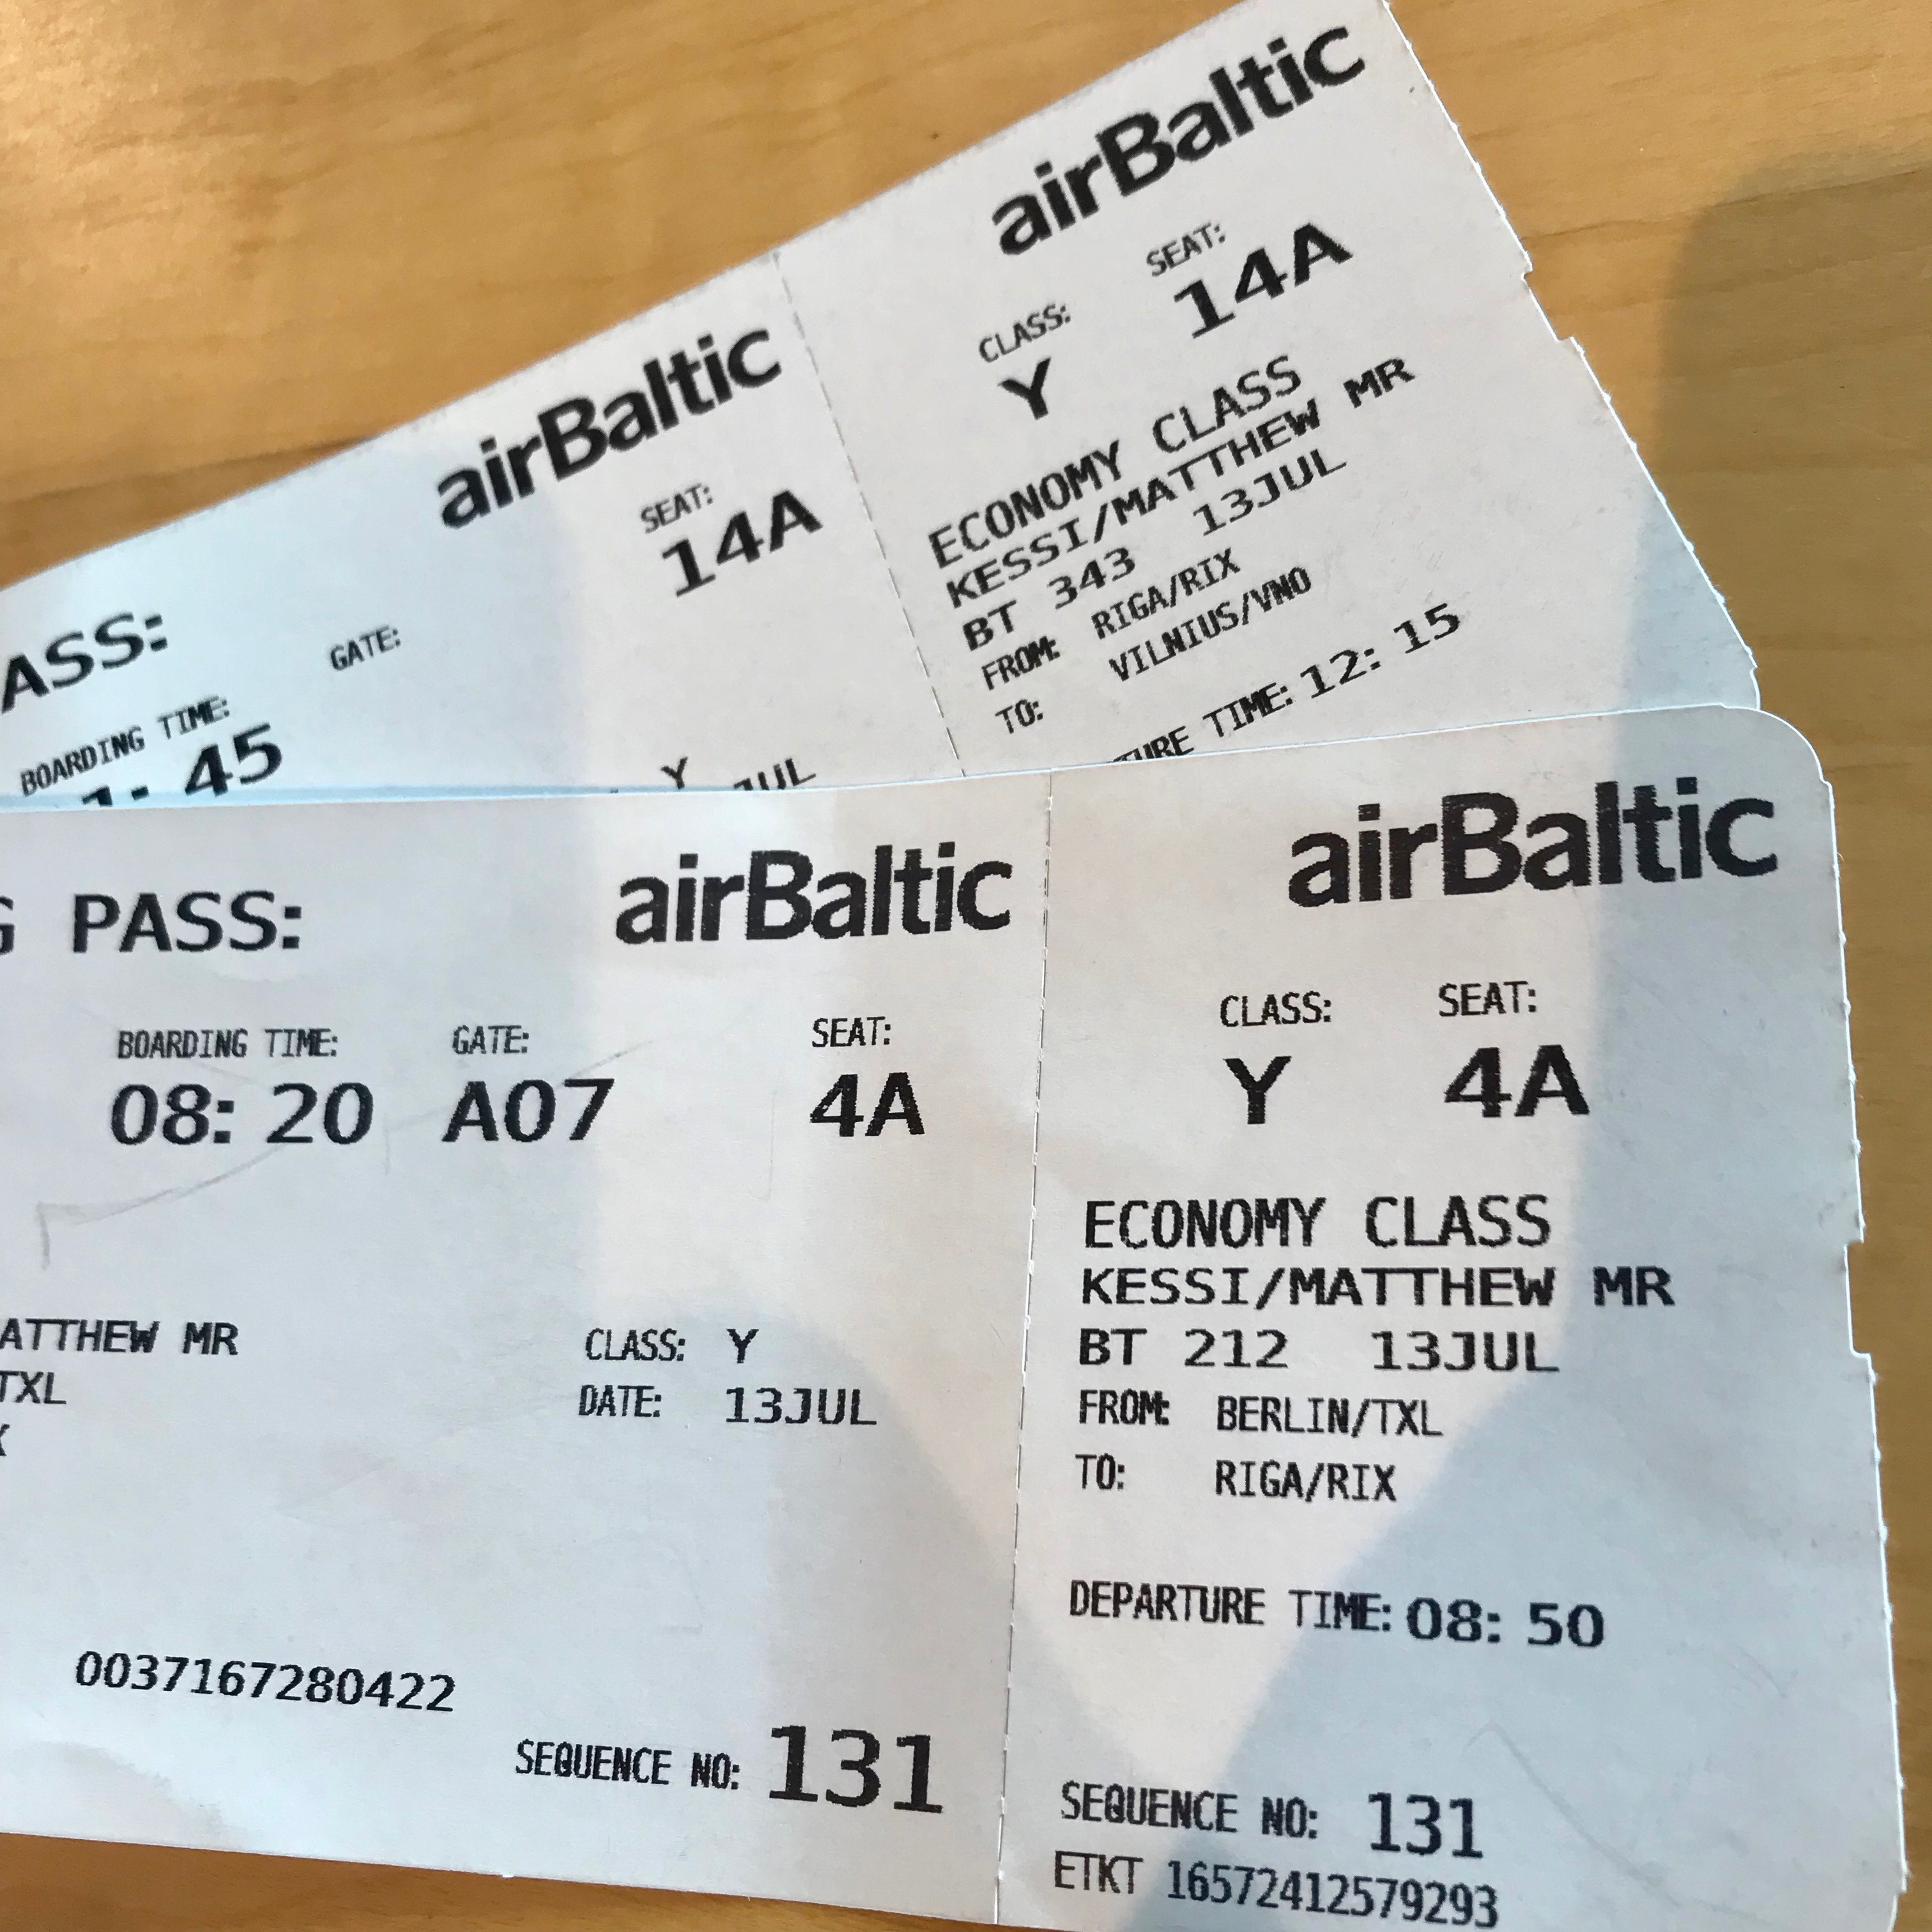 Two passenger boarding cards for a flight from Berlin Tegel to Riga.  The airBaltic tickets are on white paper with black lettering and a perforated edge where a stub could be ripped off upon boarding.  